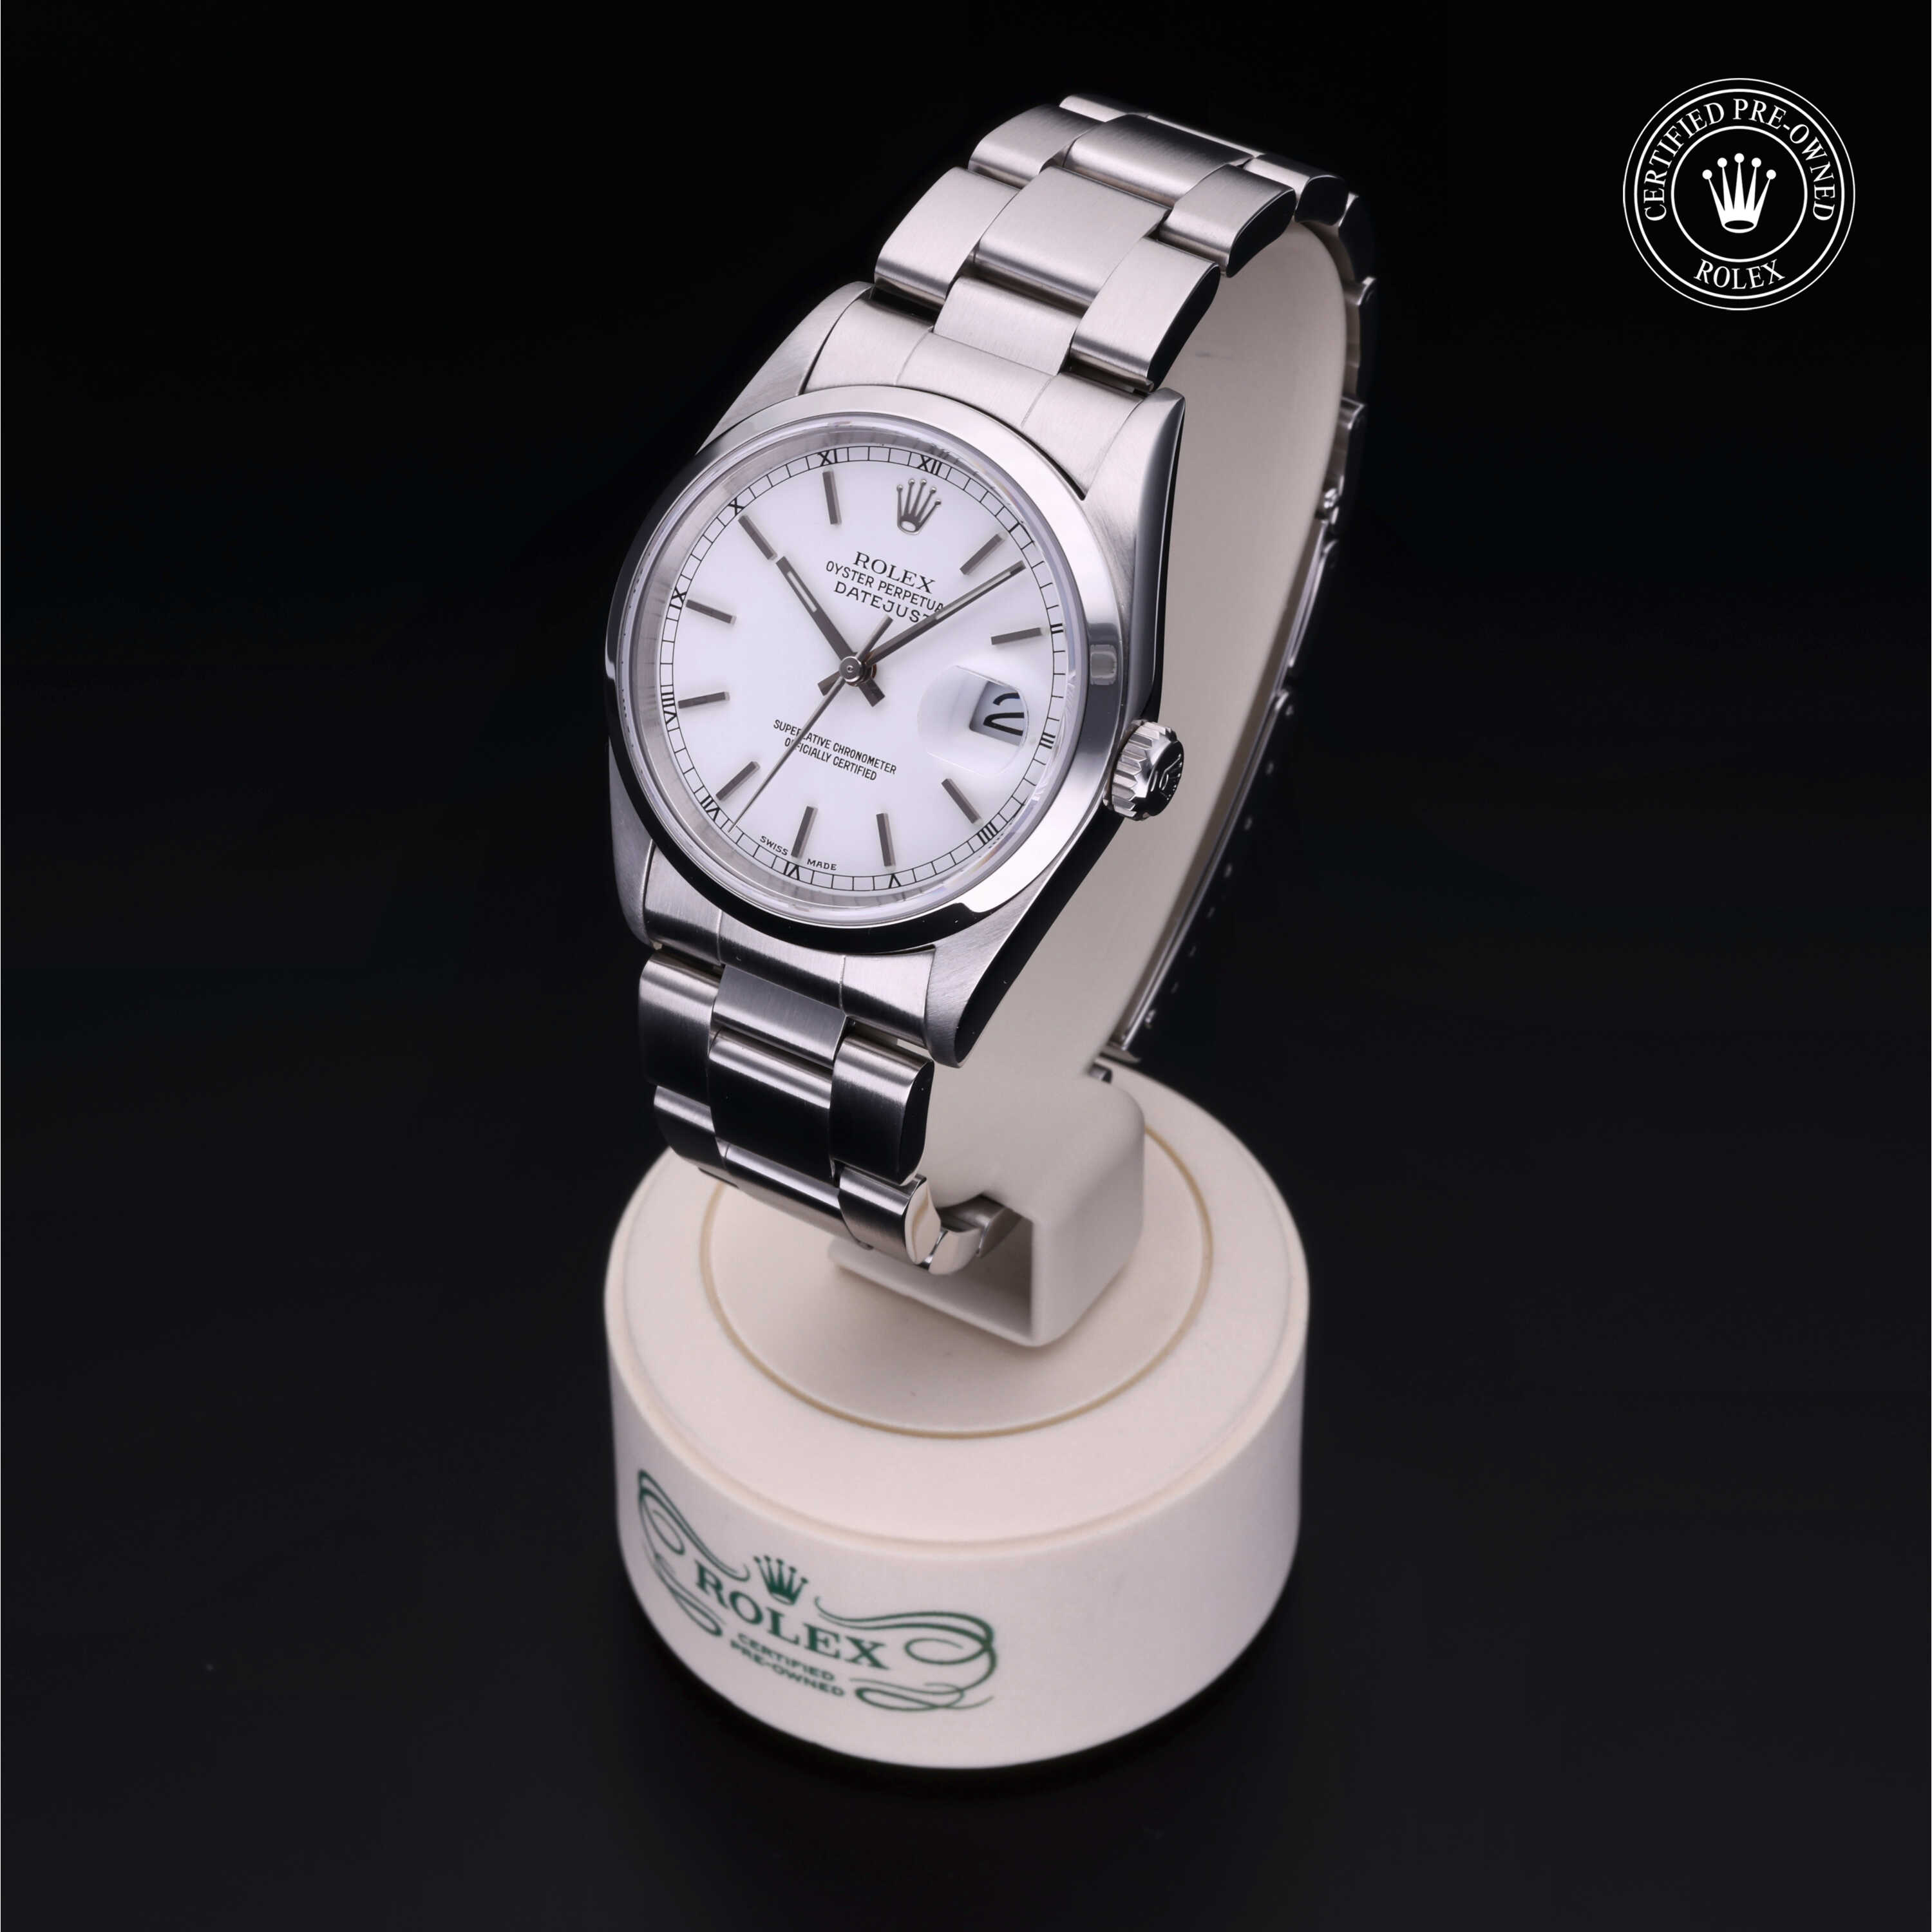 Rolex Datejust in Oystersteel M16200-0032 at Wilson & Son Jewelers